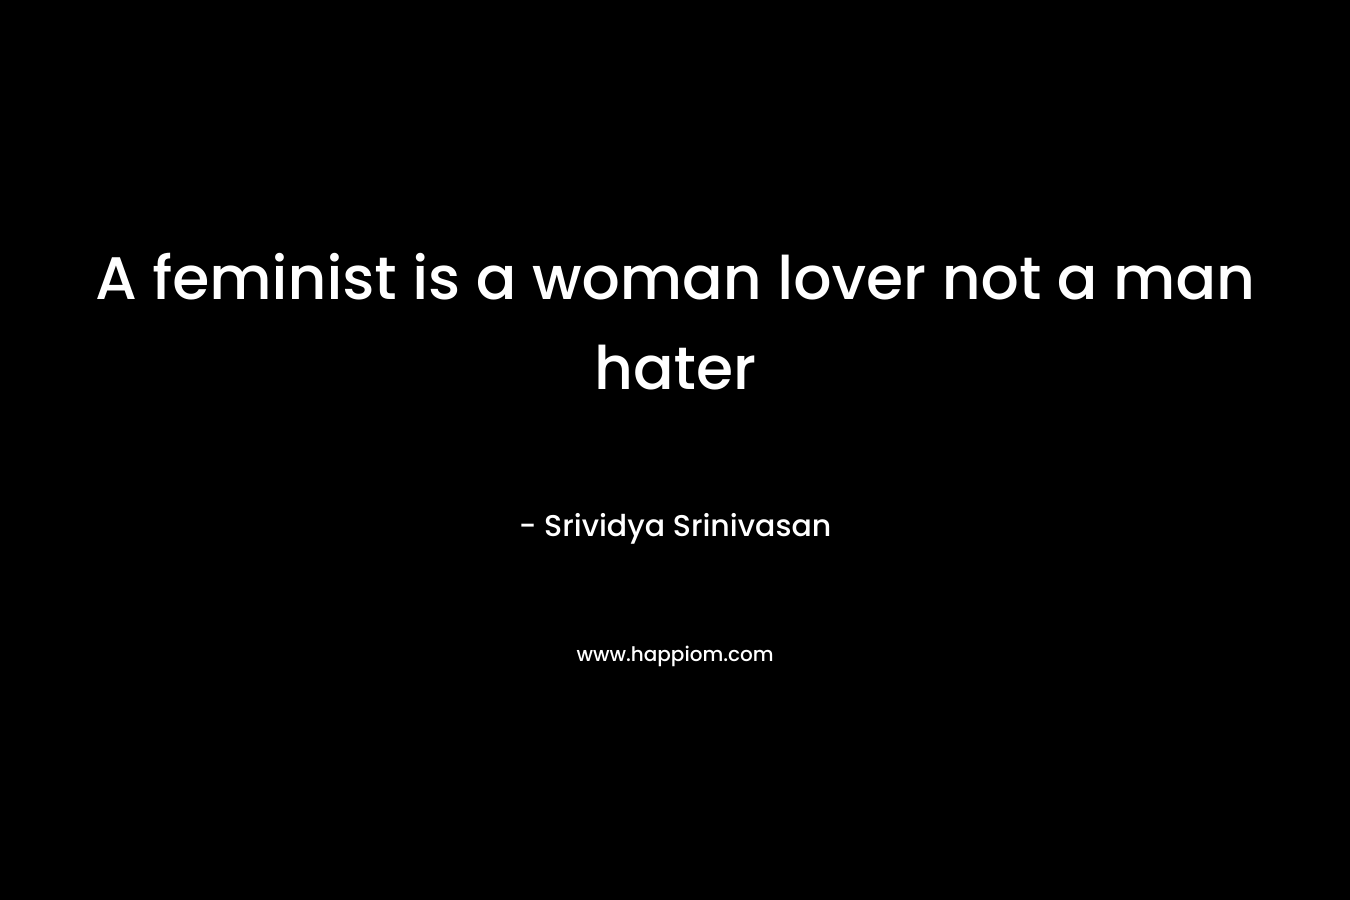 A feminist is a woman lover not a man hater